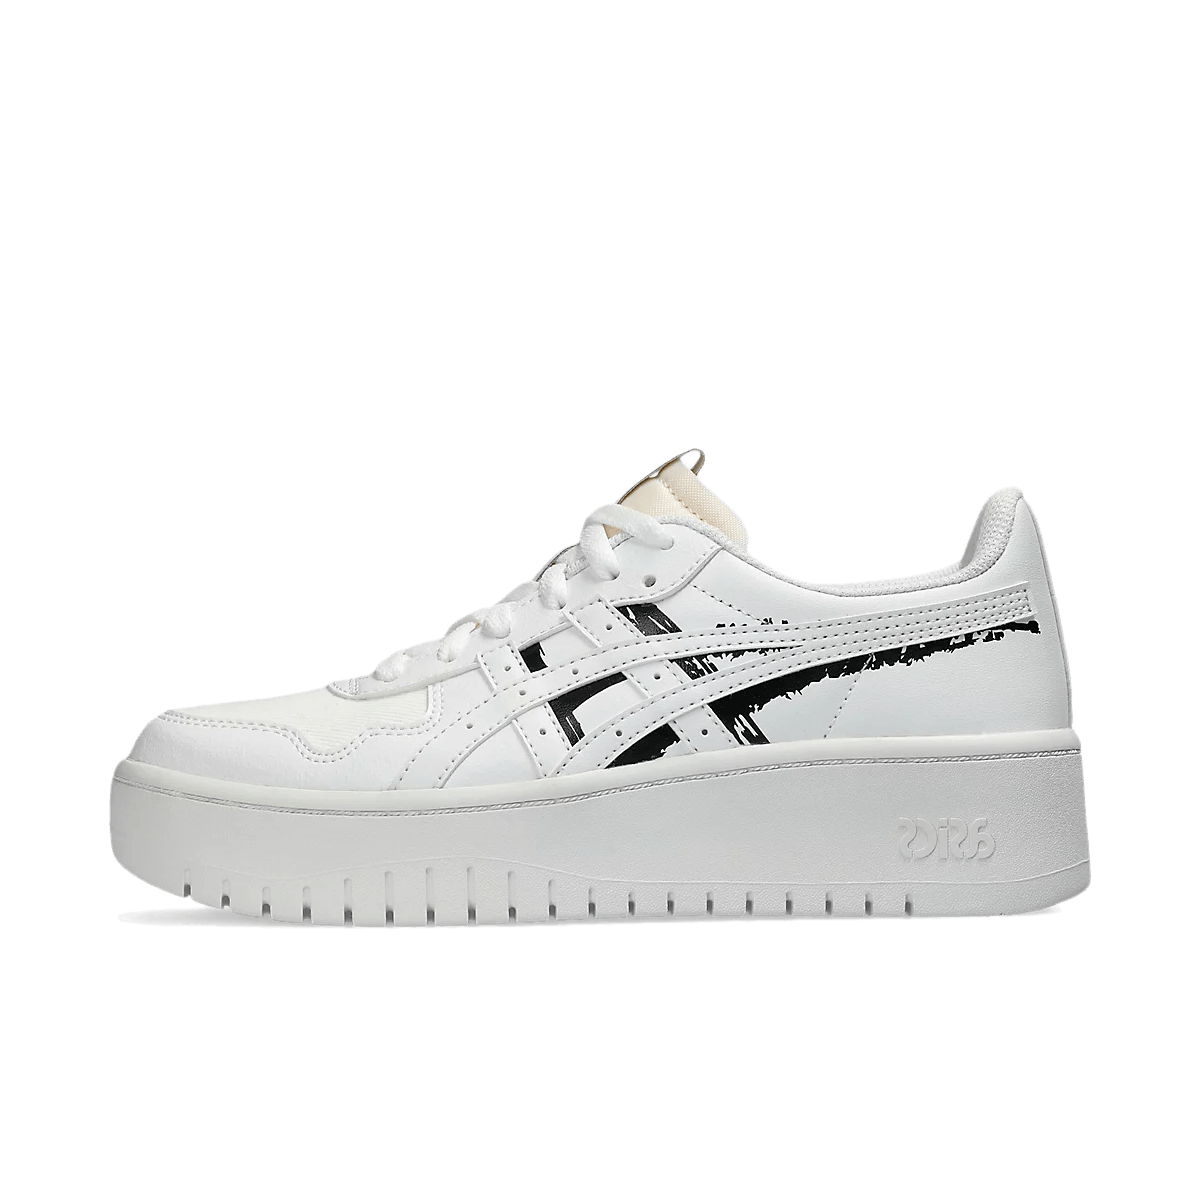 Asics Japan S PF WMNS 'White' - Imperfection Pack